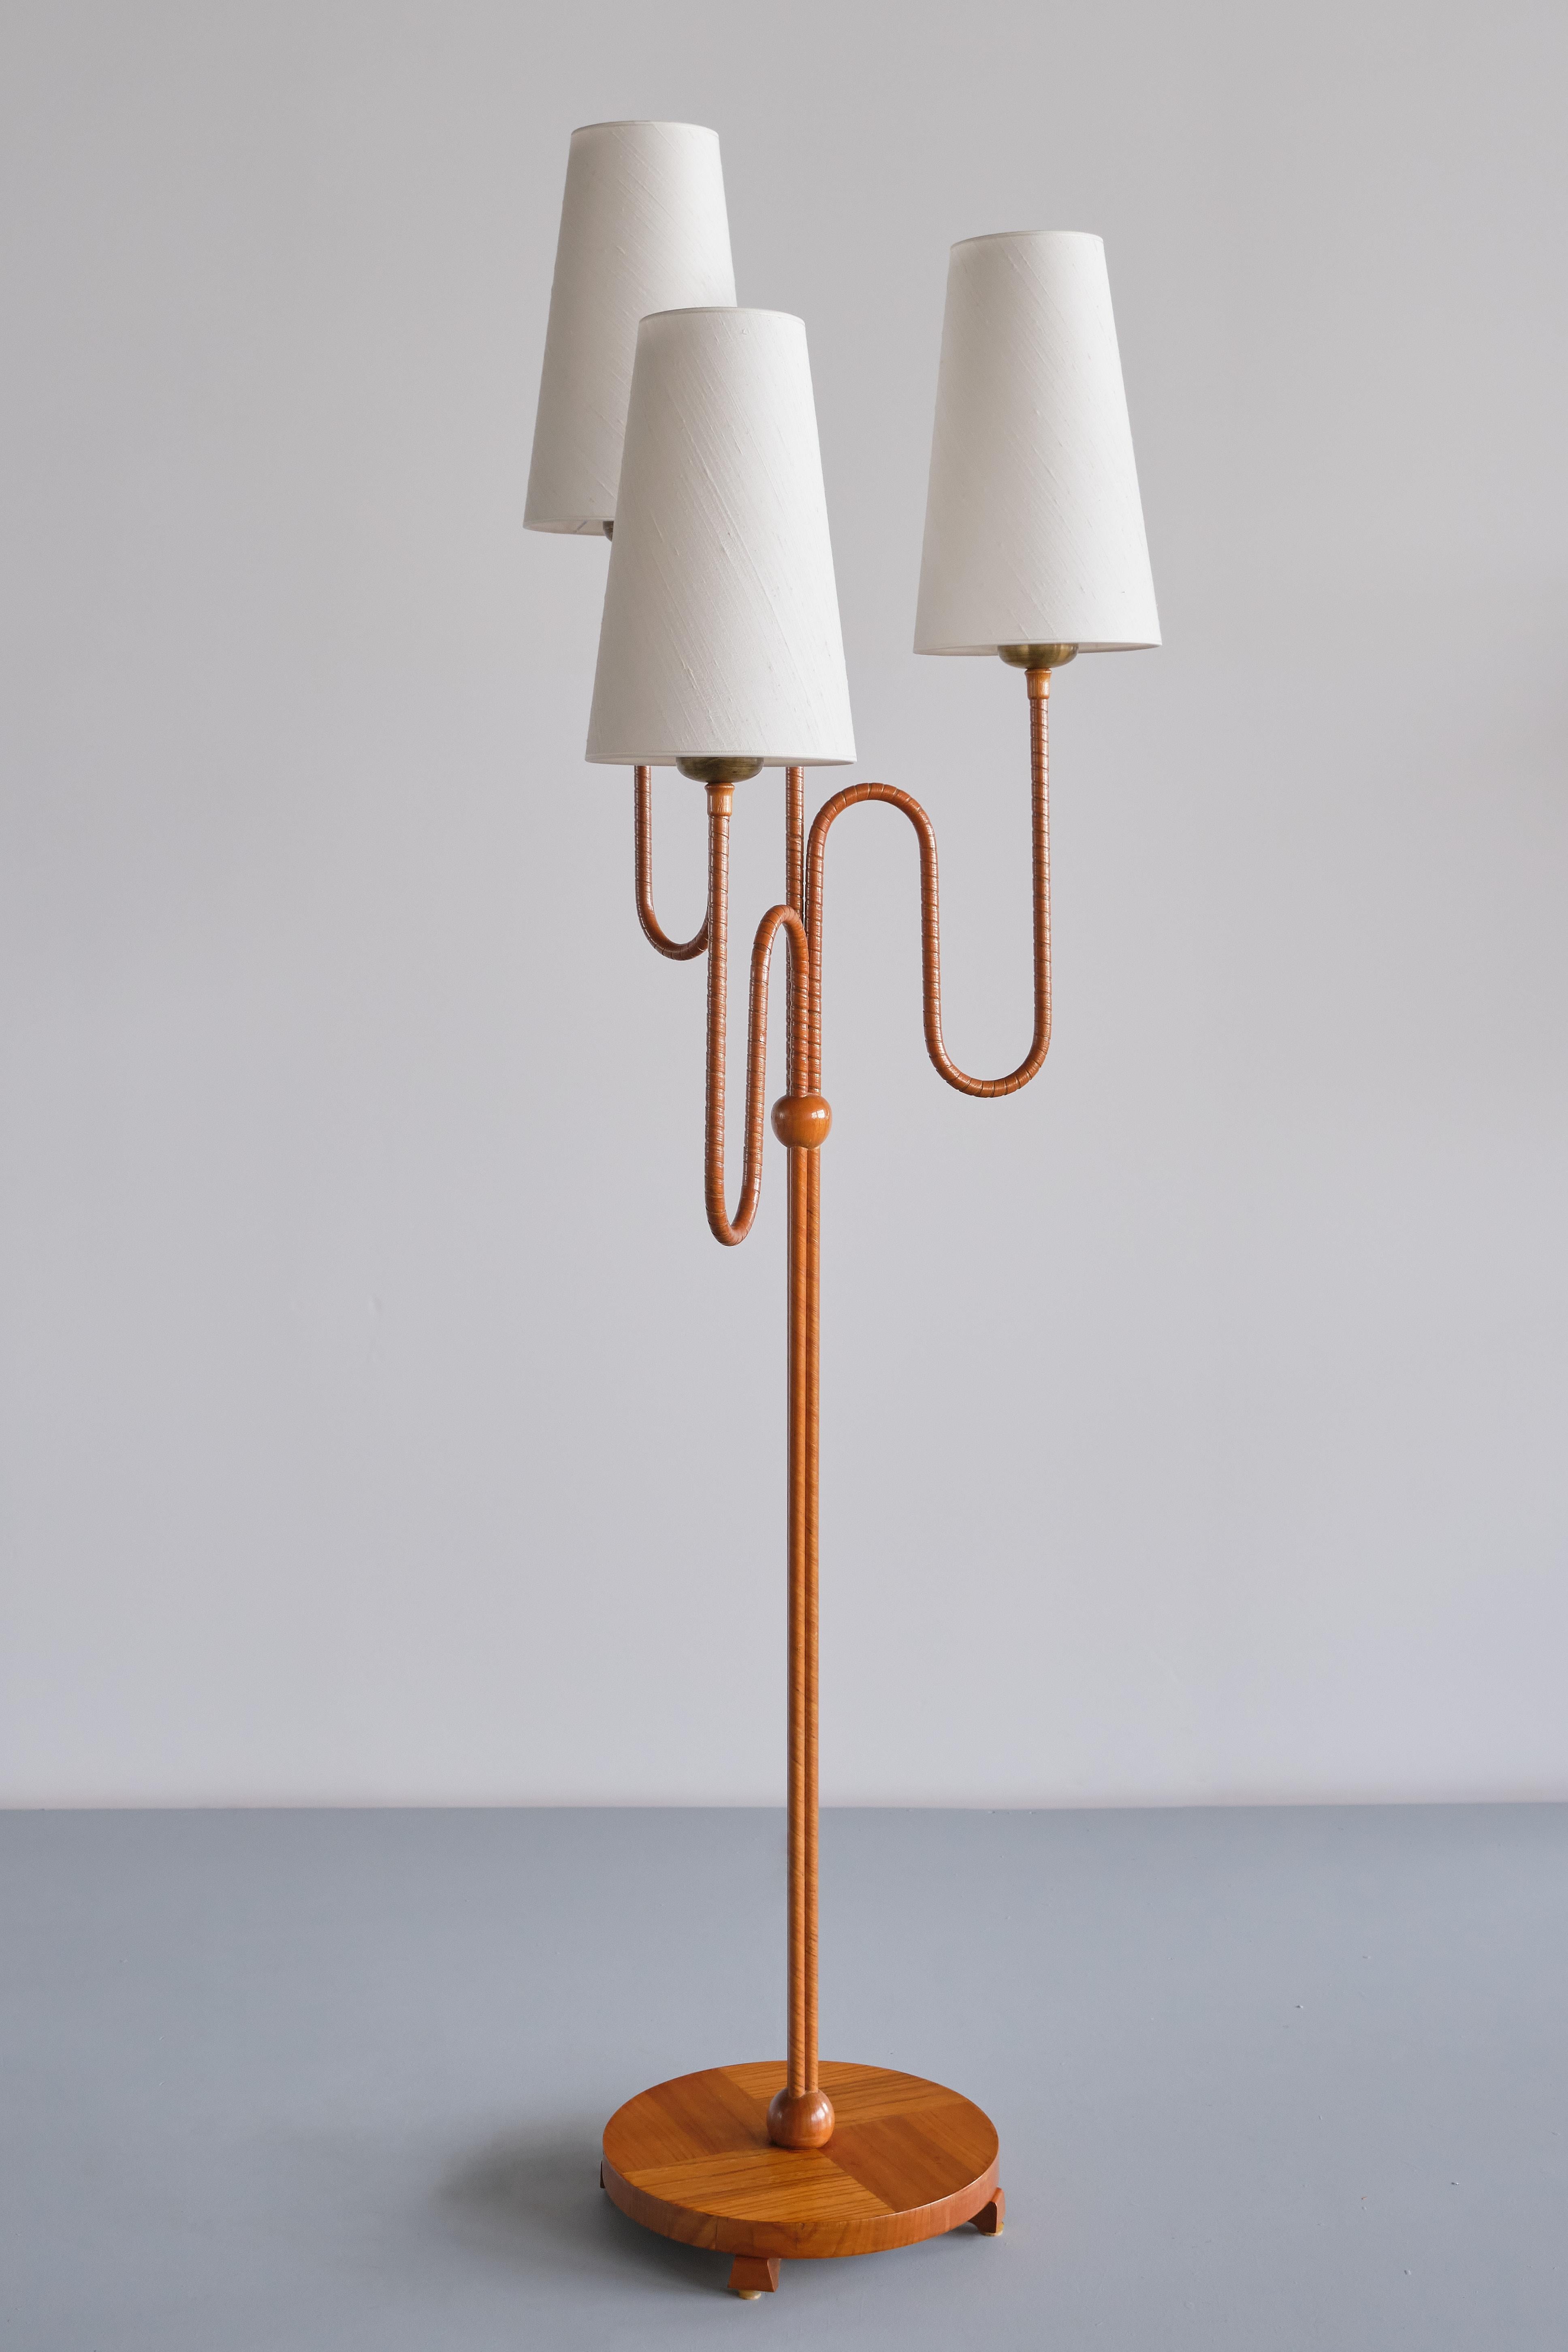 This very rare three arm floor lamp was designed and produced in Sweden in the 1930s. The lamp has been attributed as an early Harald Notini design for Arvid Böhlmarks Lampfabrik. With its sculptural arms and organic shape, the lamp is a great